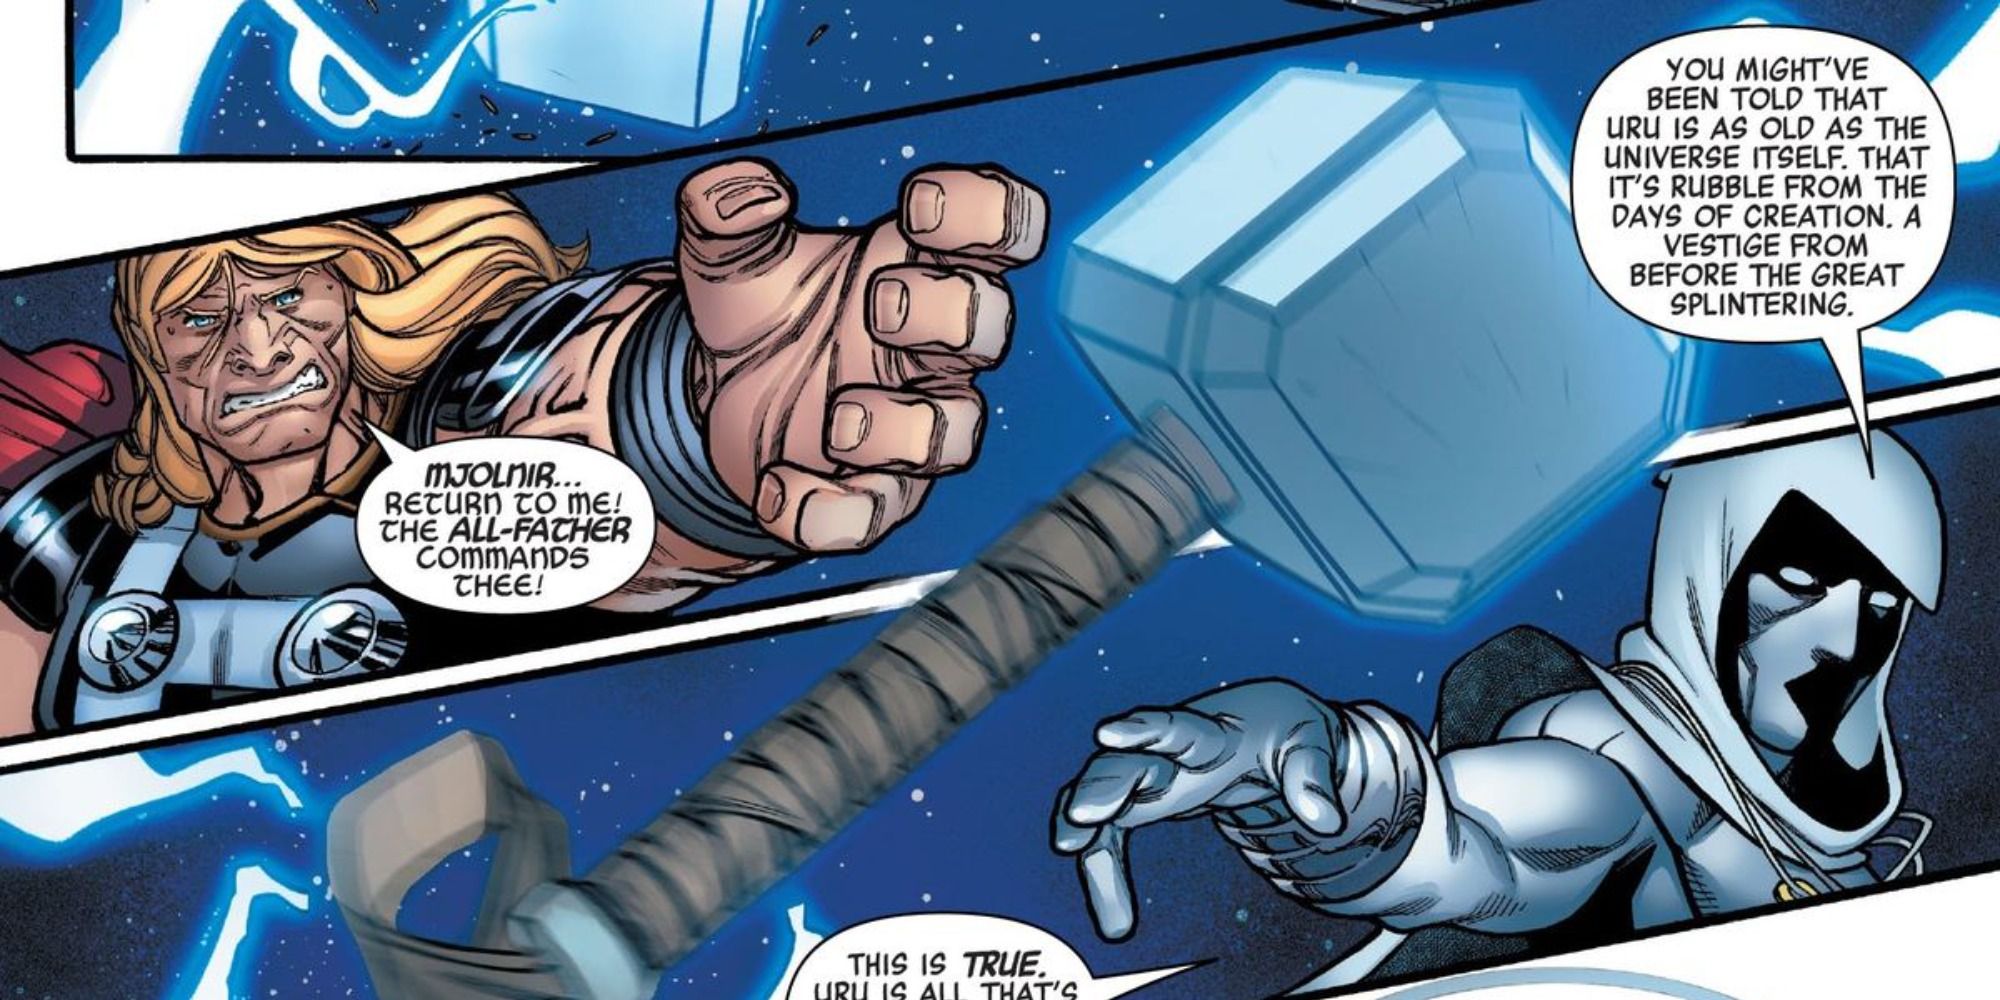 An image of Moon Knight calling Thor's Hammer in the Marvel comics